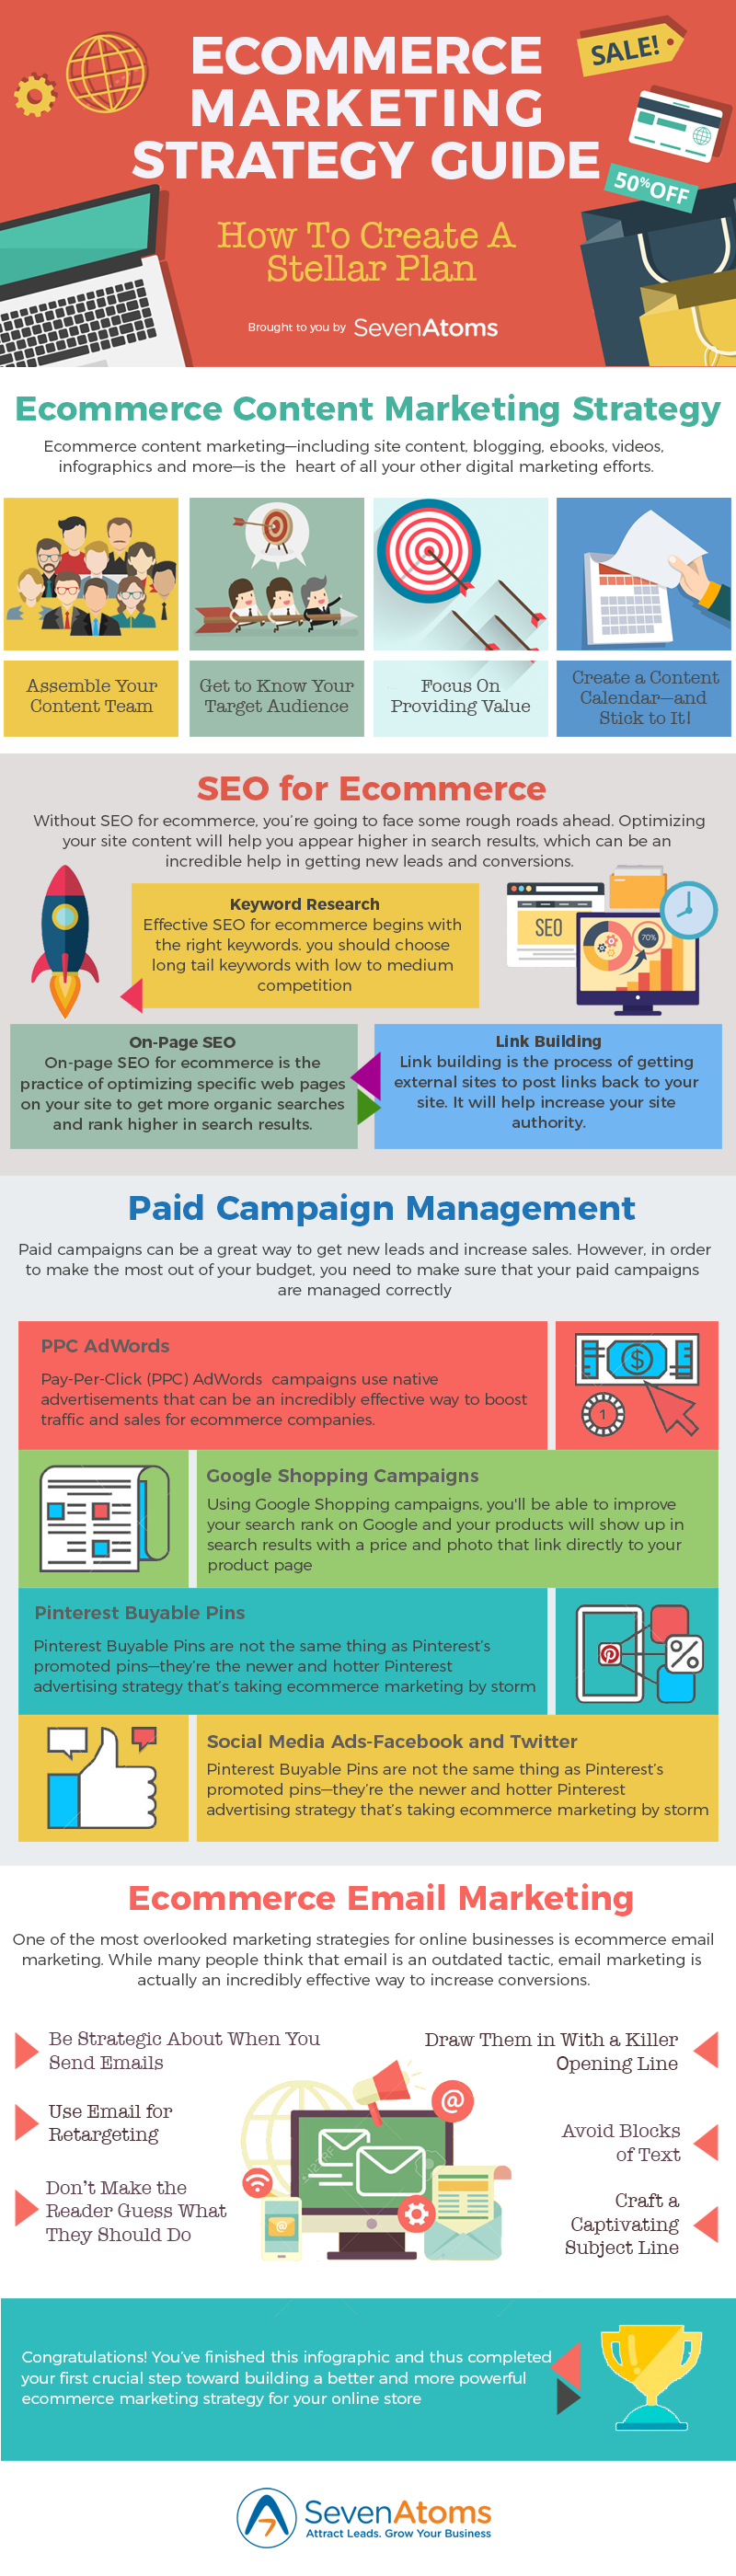 Ecommerce-Marketing-Strategy-Guide-INFOGRAPHIC-1